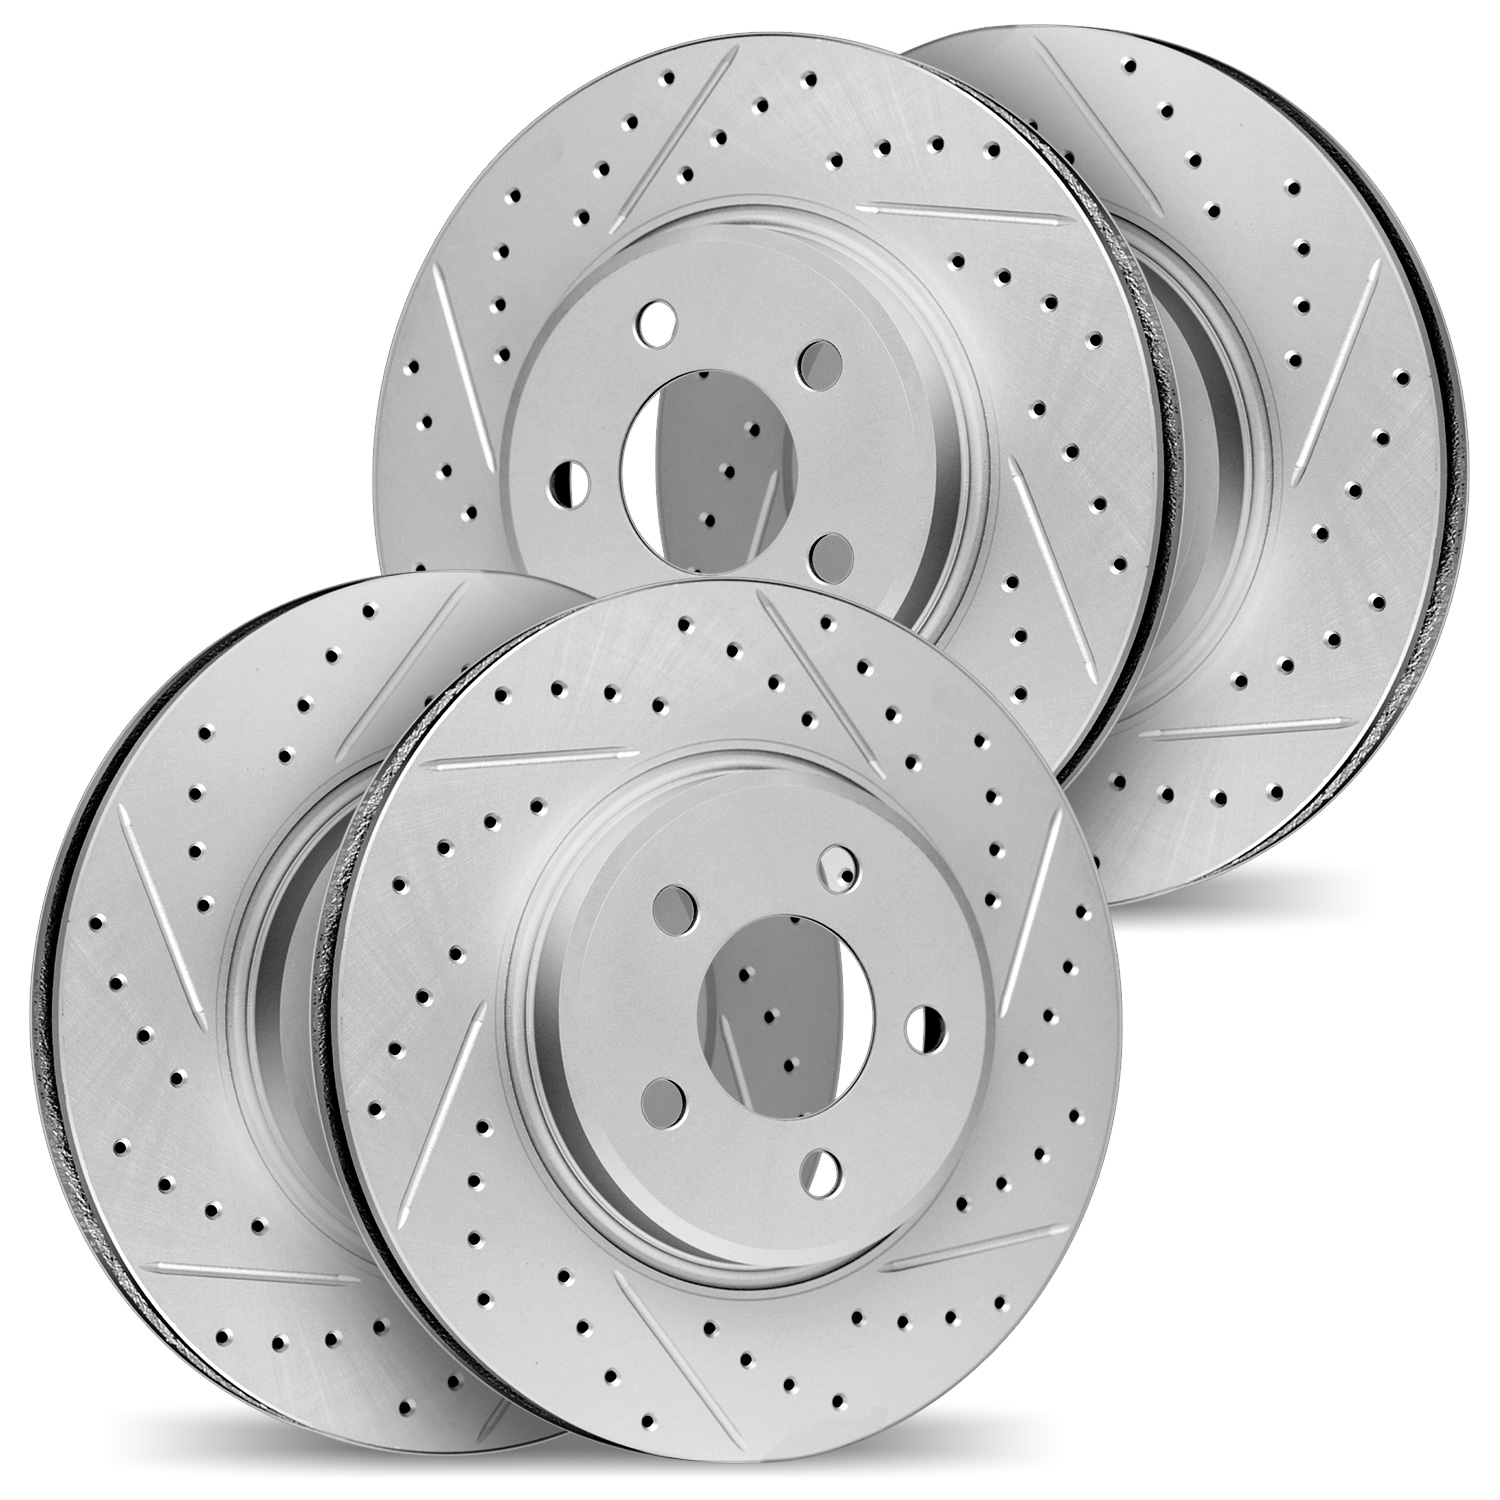 2004-31081 Geoperformance Drilled/Slotted Brake Rotors, Fits Select Lexus/Toyota/Scion, Position: Front and Rear